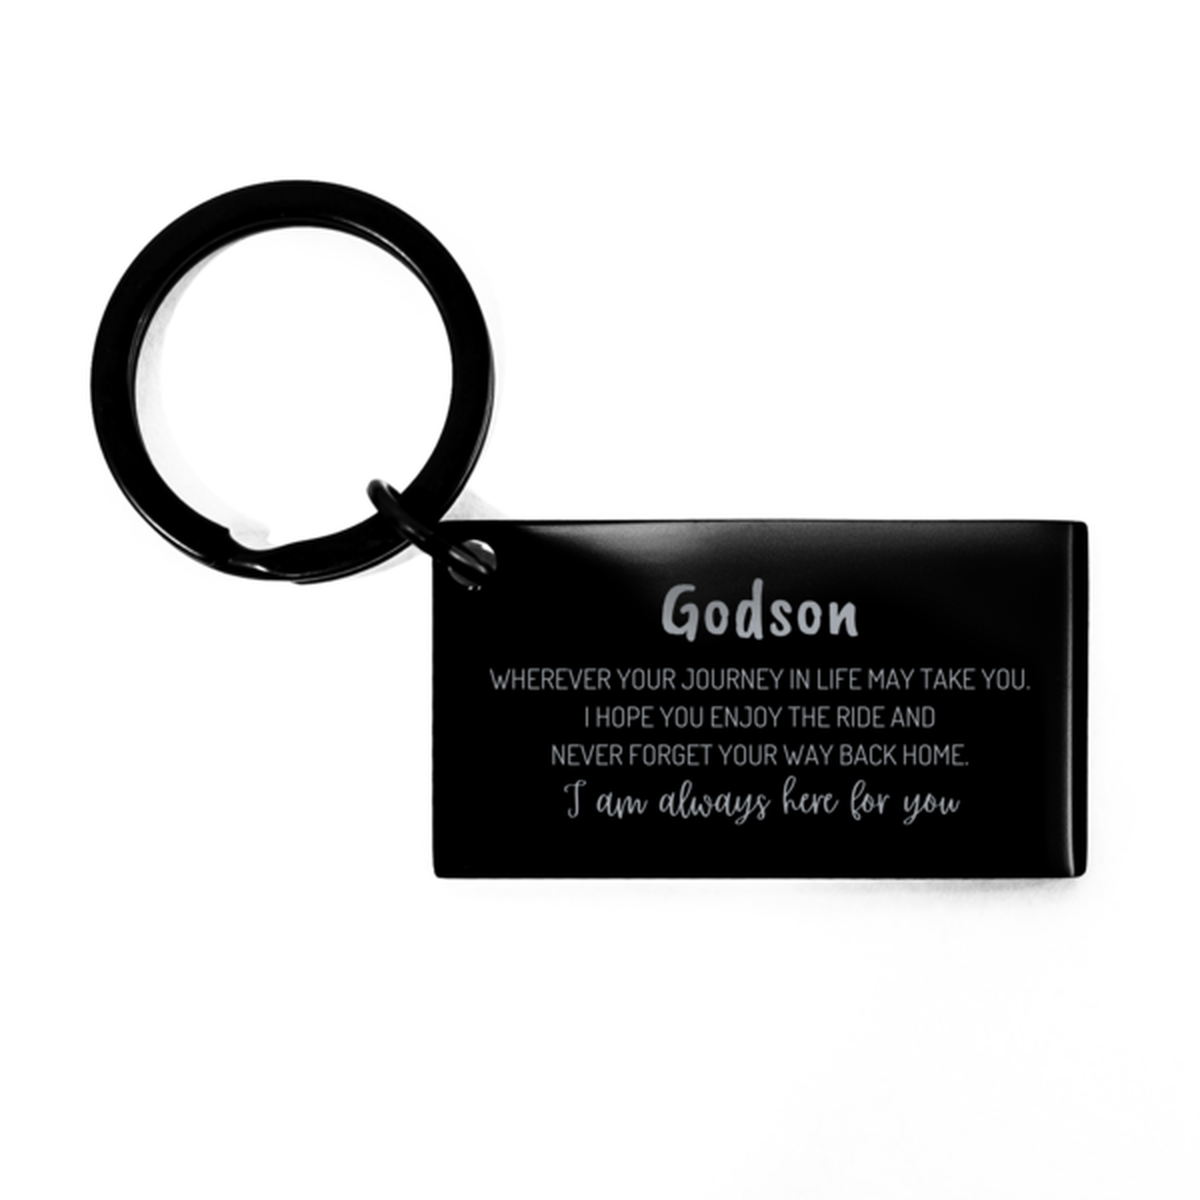 Godson wherever your journey in life may take you, I am always here for you Godson Keychain, Awesome Christmas Gifts For Godson, Godson Birthday Gifts for Men Women Family Loved One